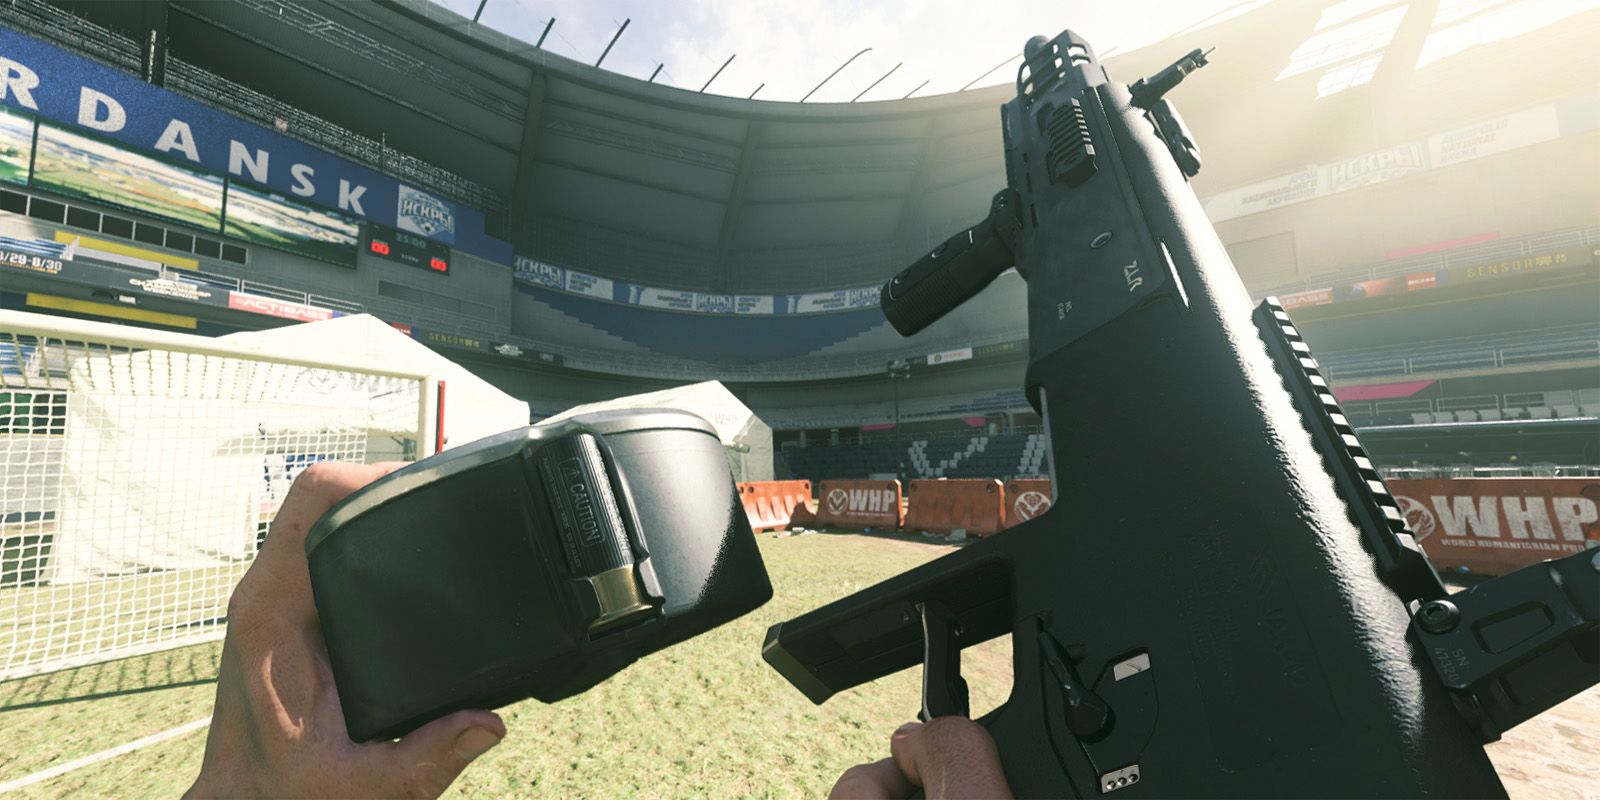 A player reloading the JAK-12 shotgun in Call of Duty Warzone.